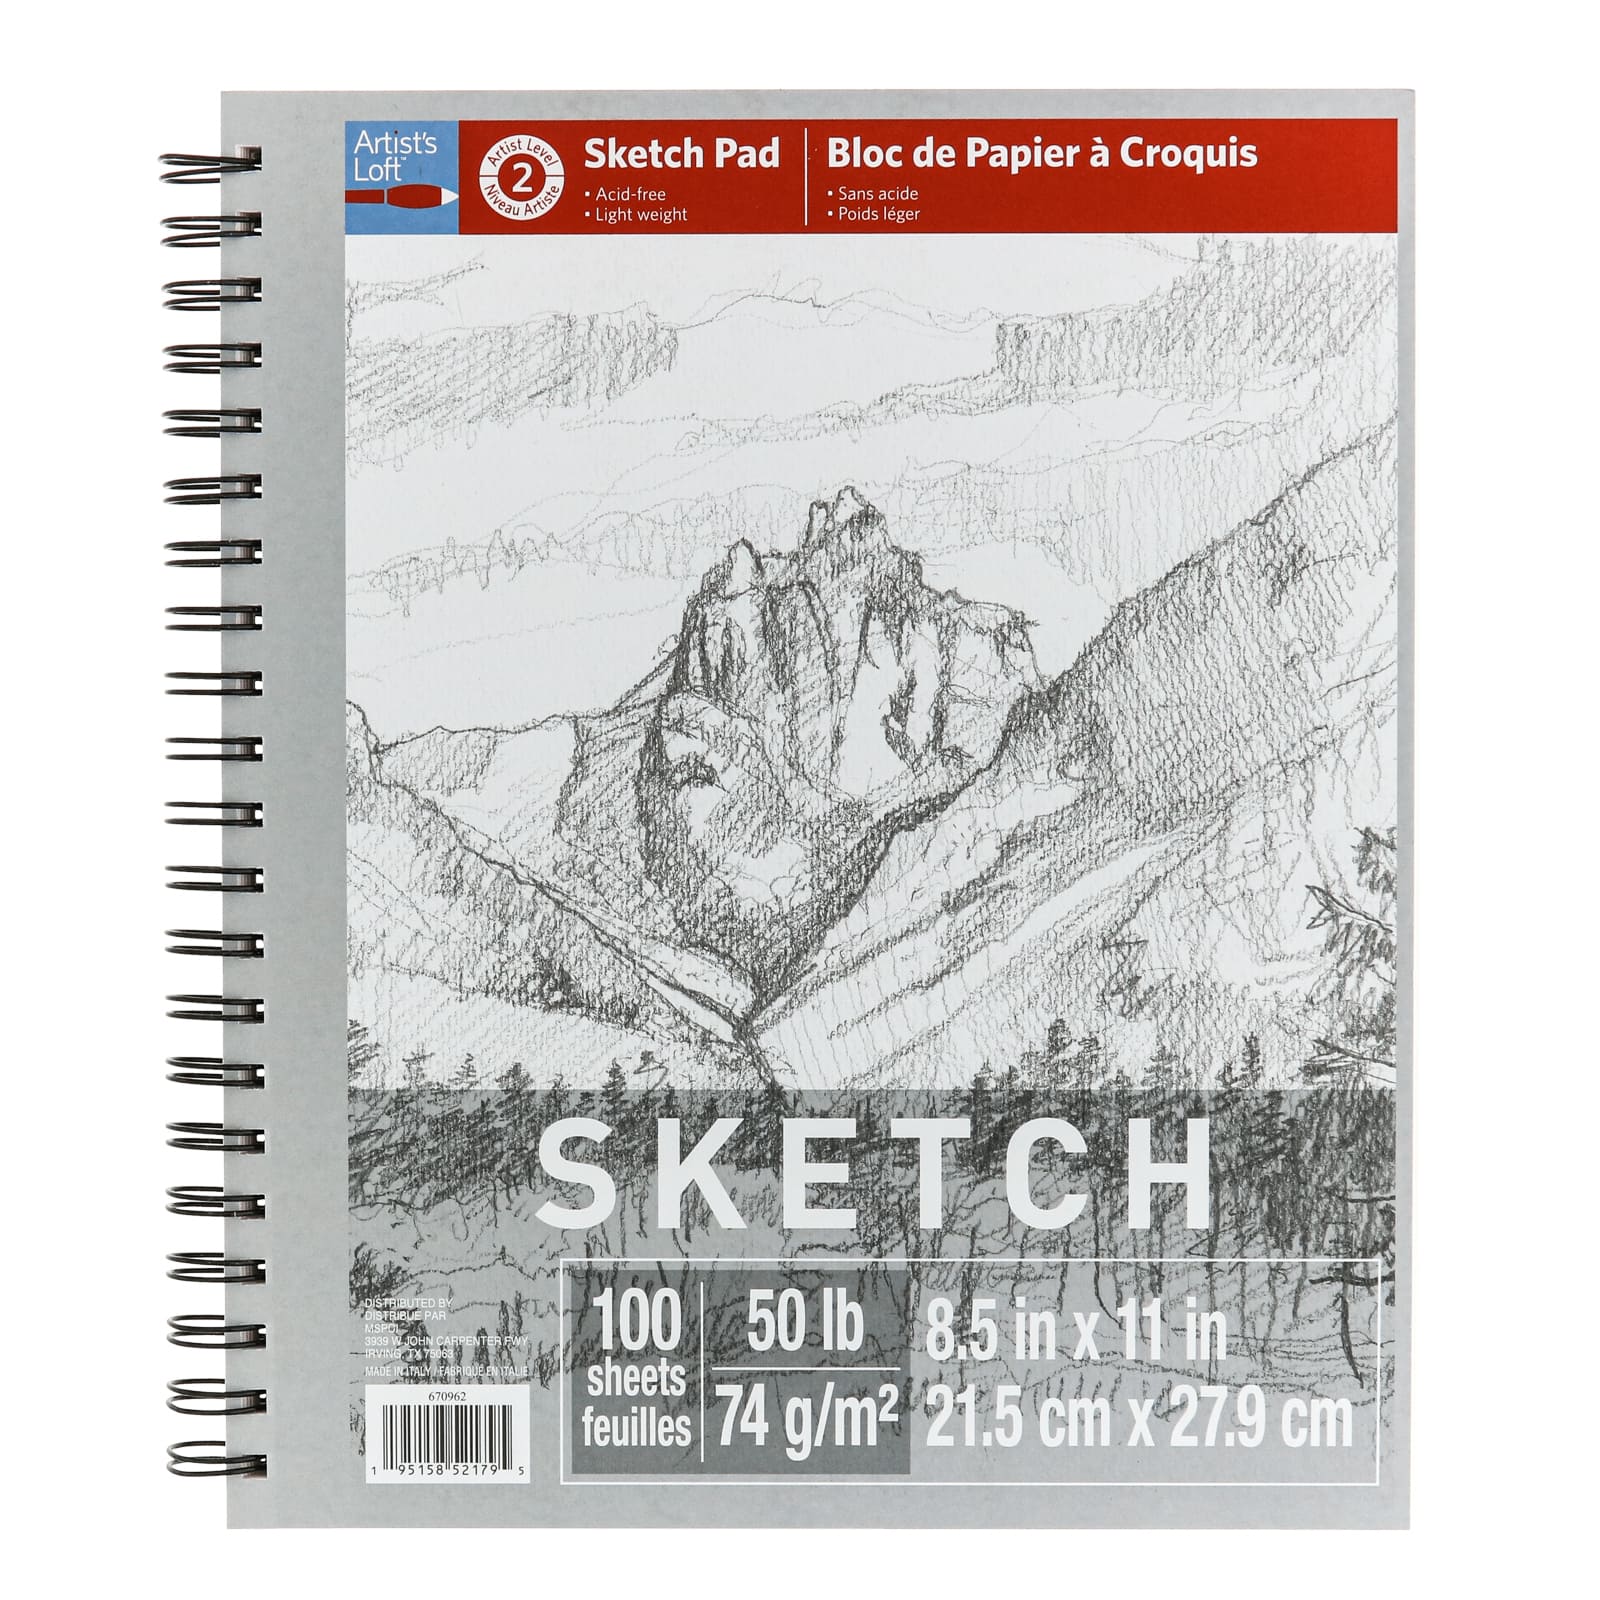 8 x 10 Premium Spiral Bound Sketch Pad, Pad of 100-Sheets, 60 Pound (100gsm) (Pack of 2 Pads) by U.S. Art Supply | Michaels